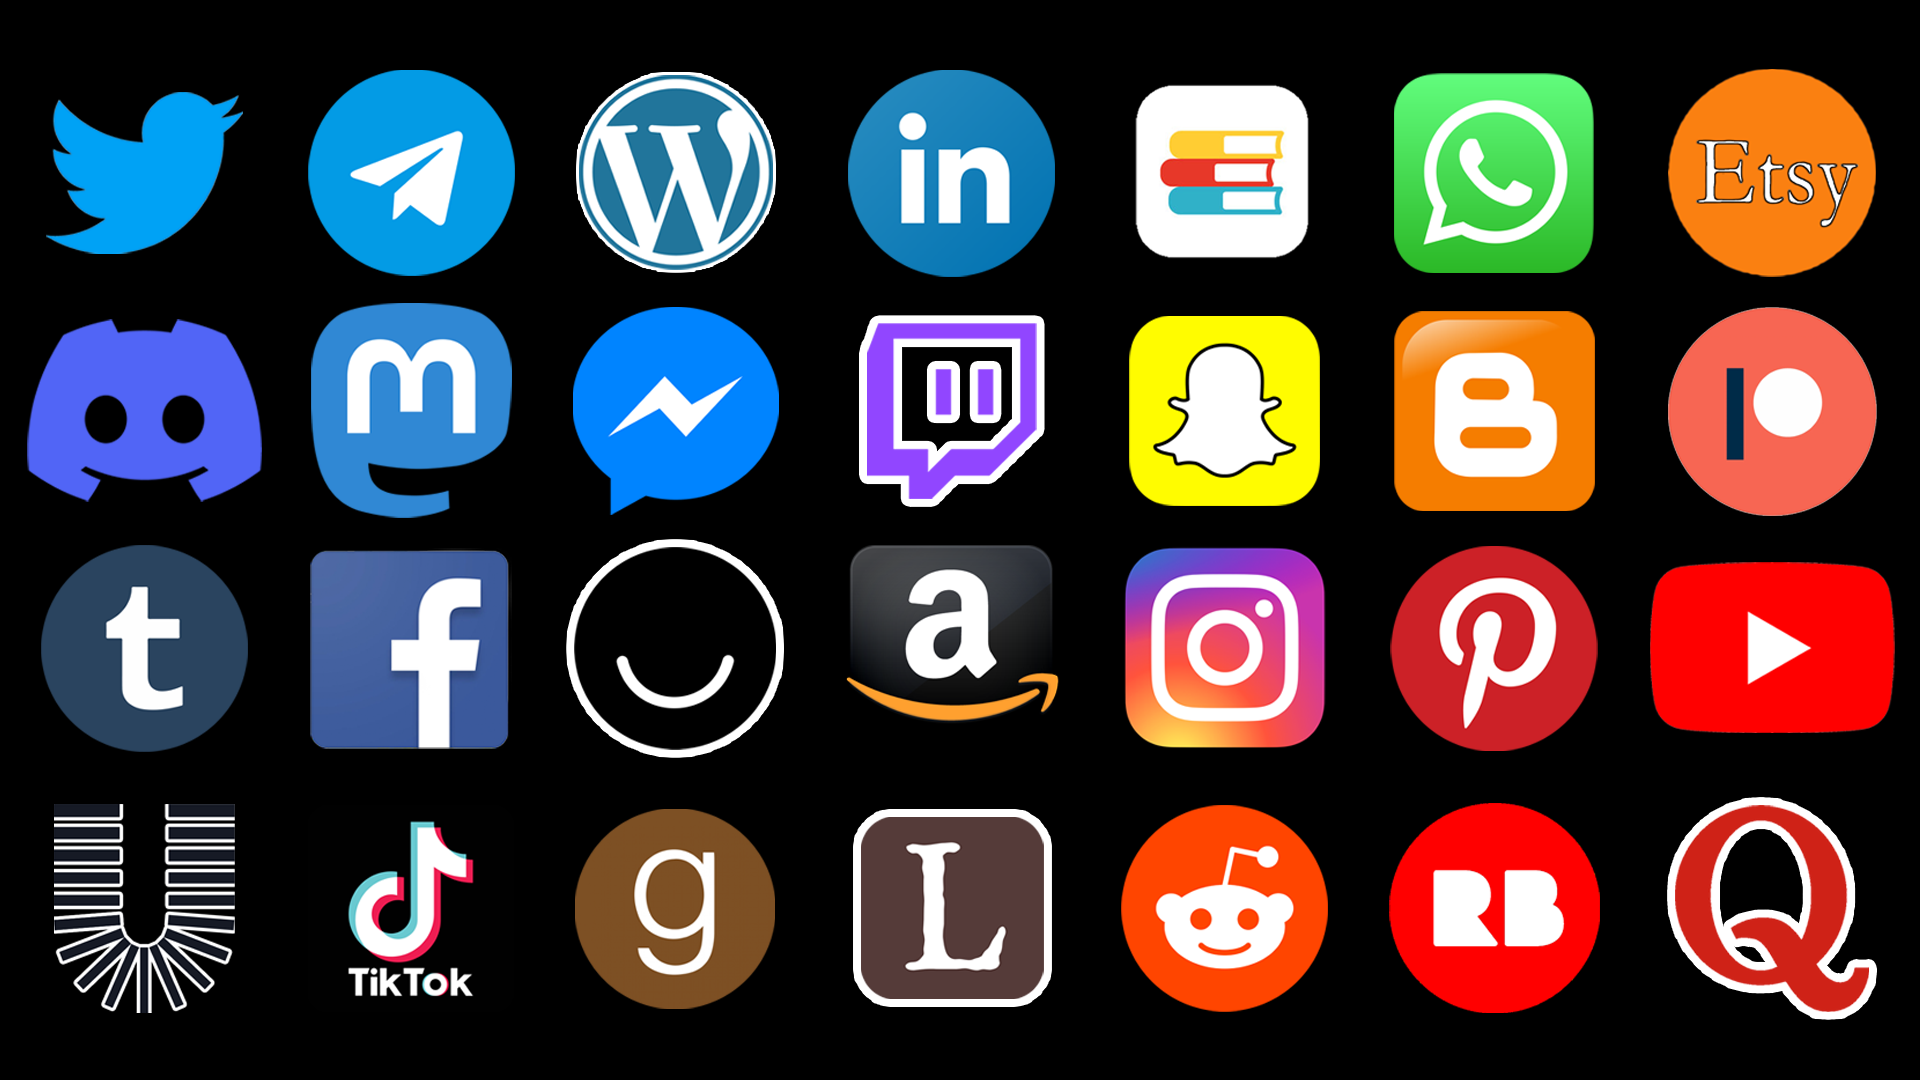 Grid of social media logos. Not quite more than you can shake a stick at, but twenty-eight at any rate. 